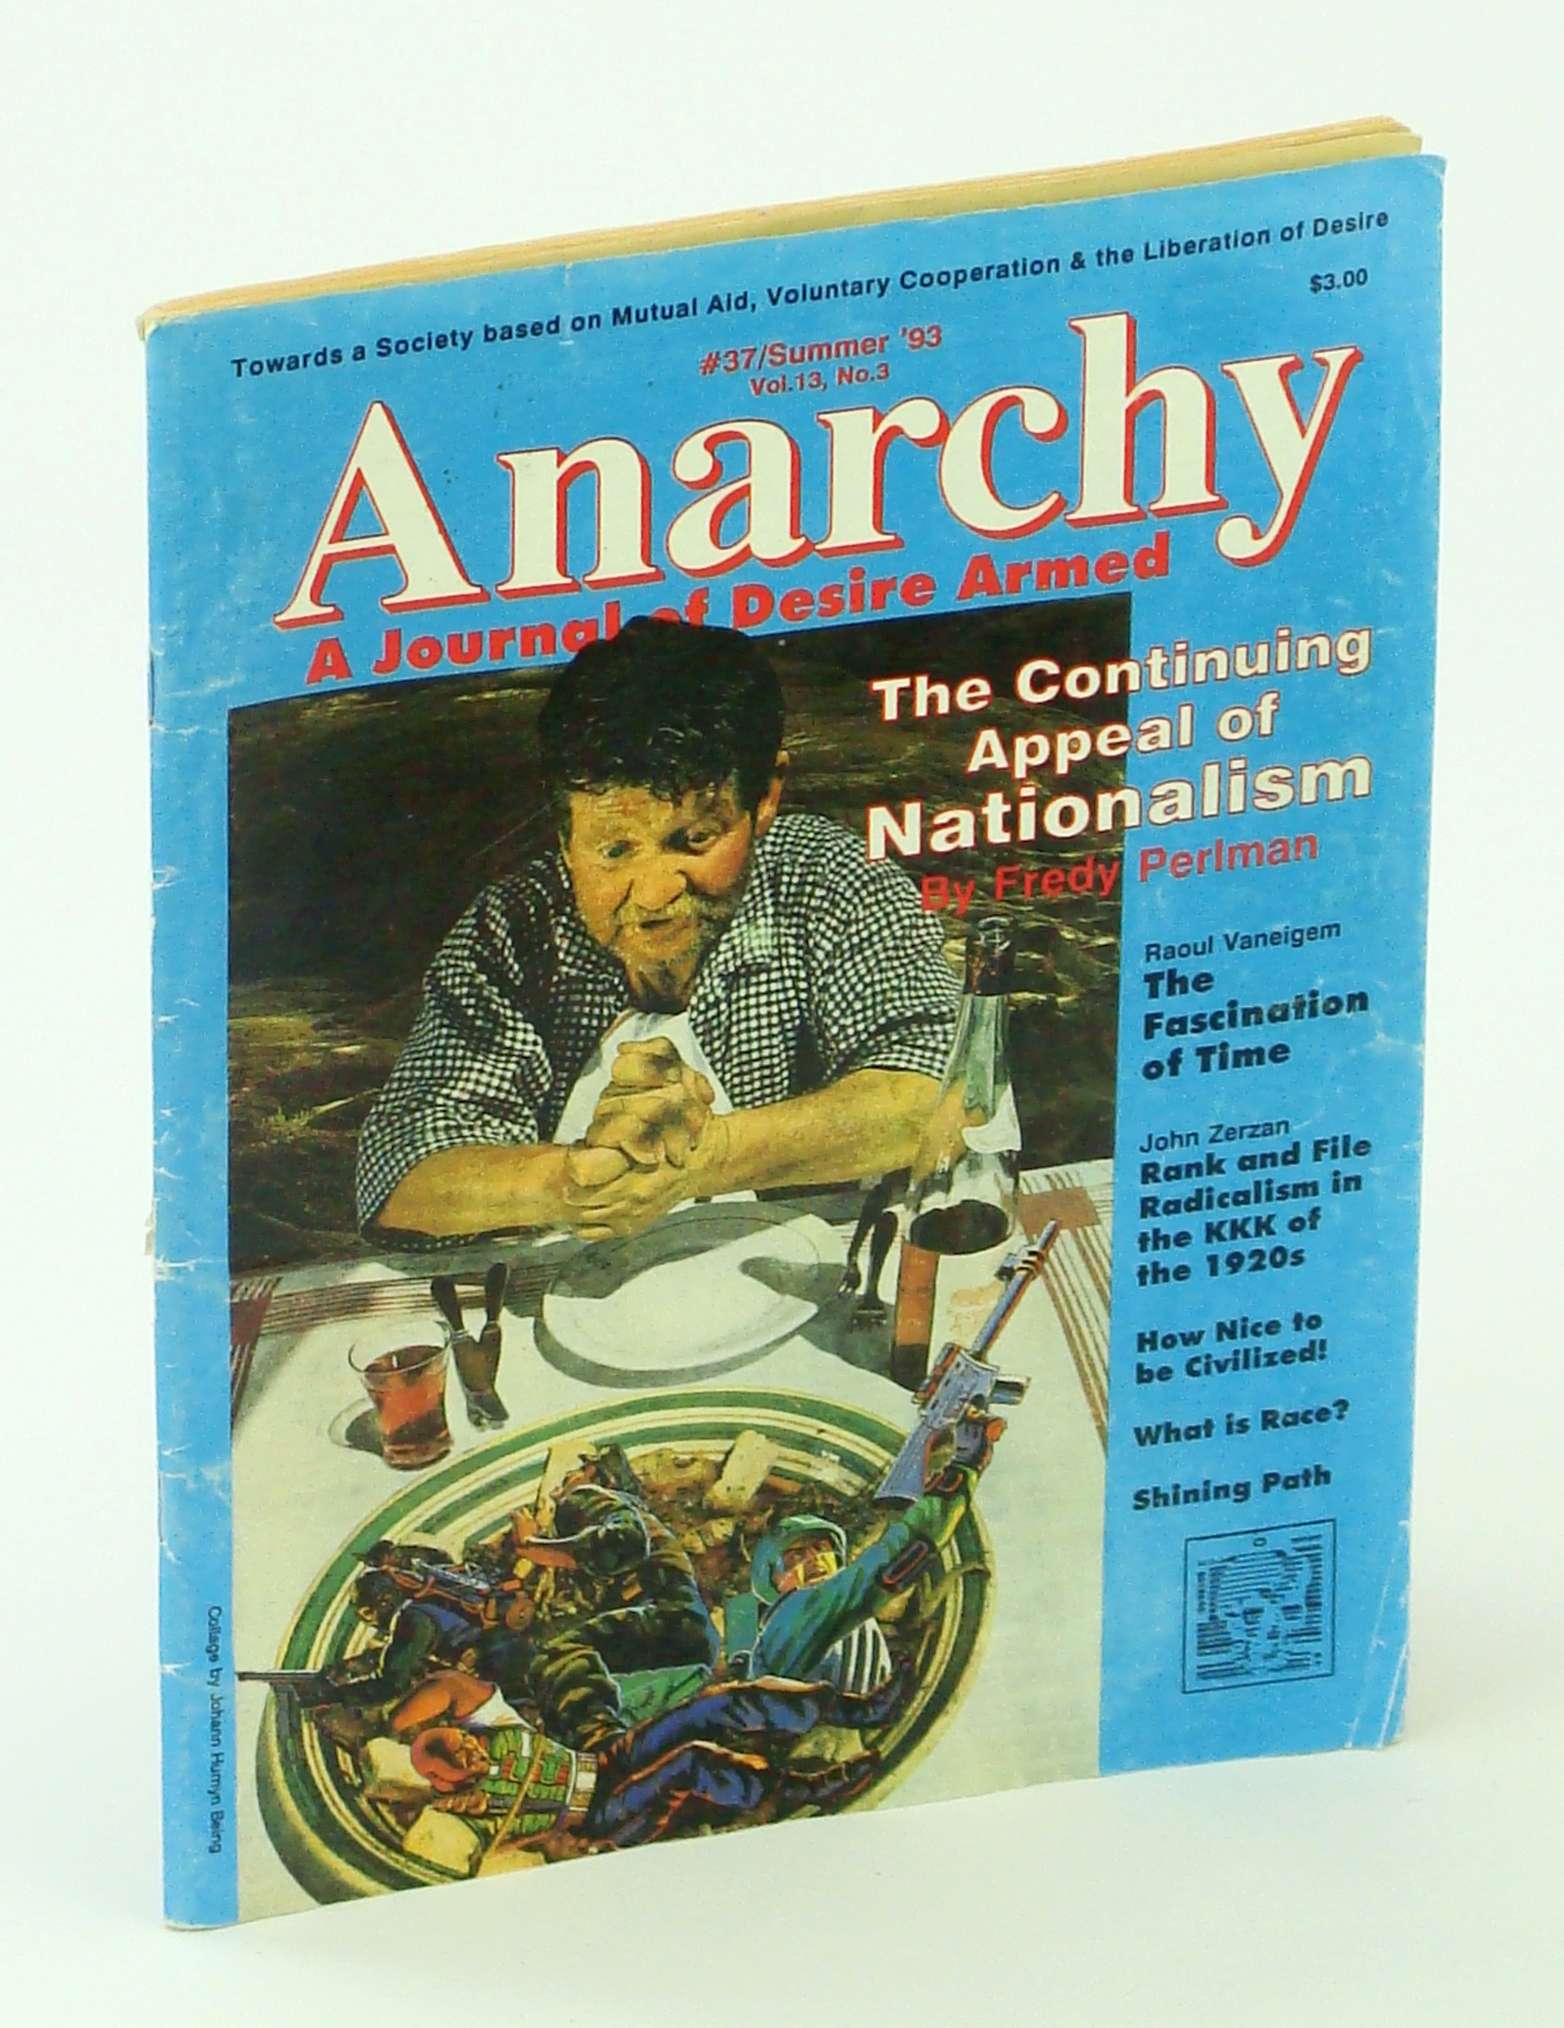 Image for Anarchy [Magazine] A Journal of Desire Armed, #37, Summer '93 [1993] Vol 13, No. 3 - The Continuing Appeal of Nationalism